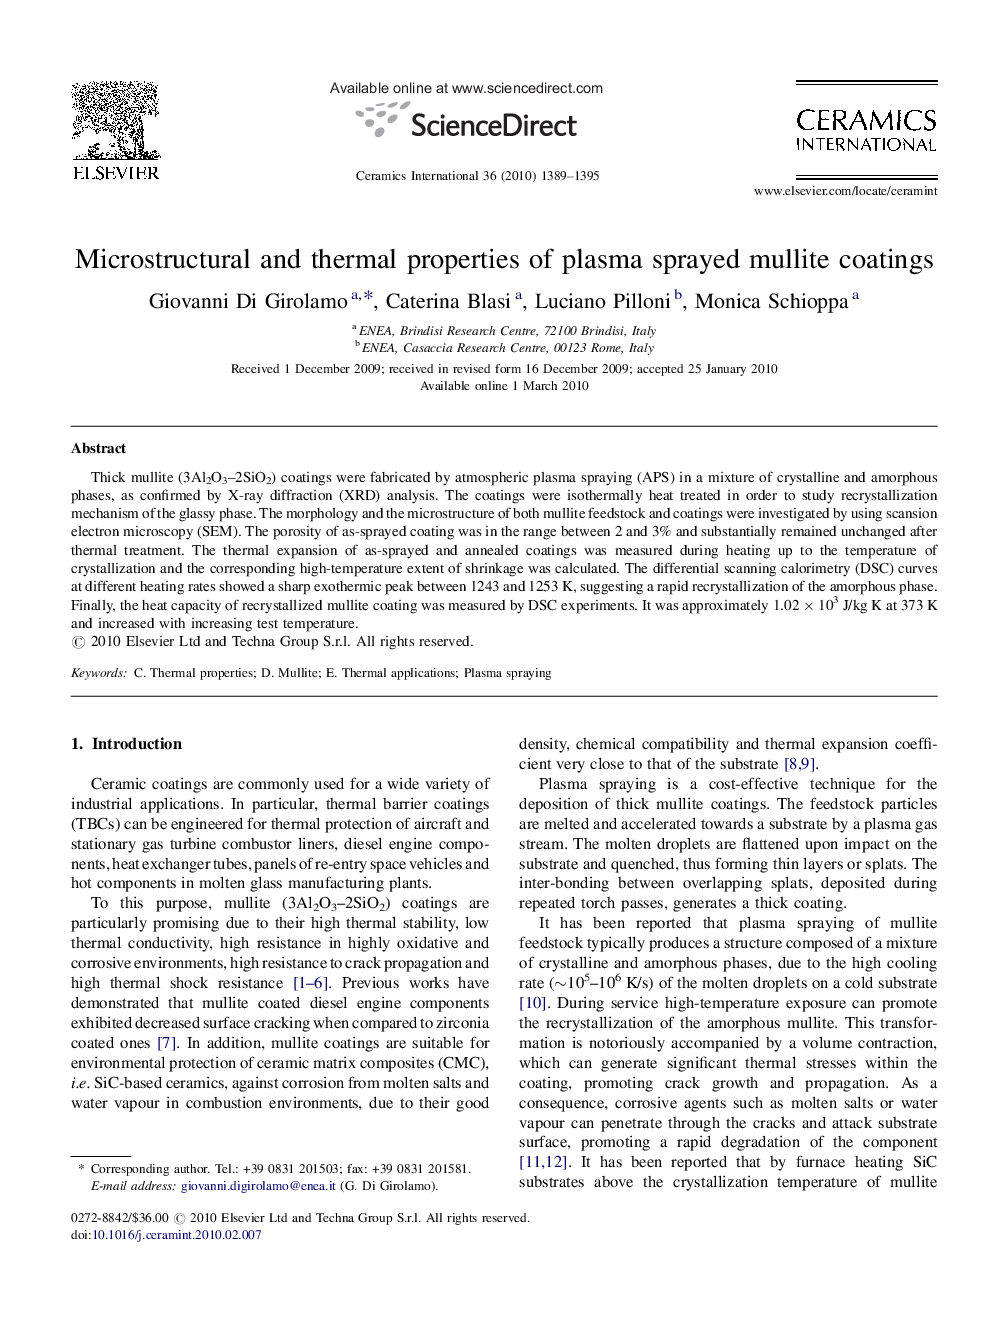 Microstructural and thermal properties of plasma sprayed mullite coatings